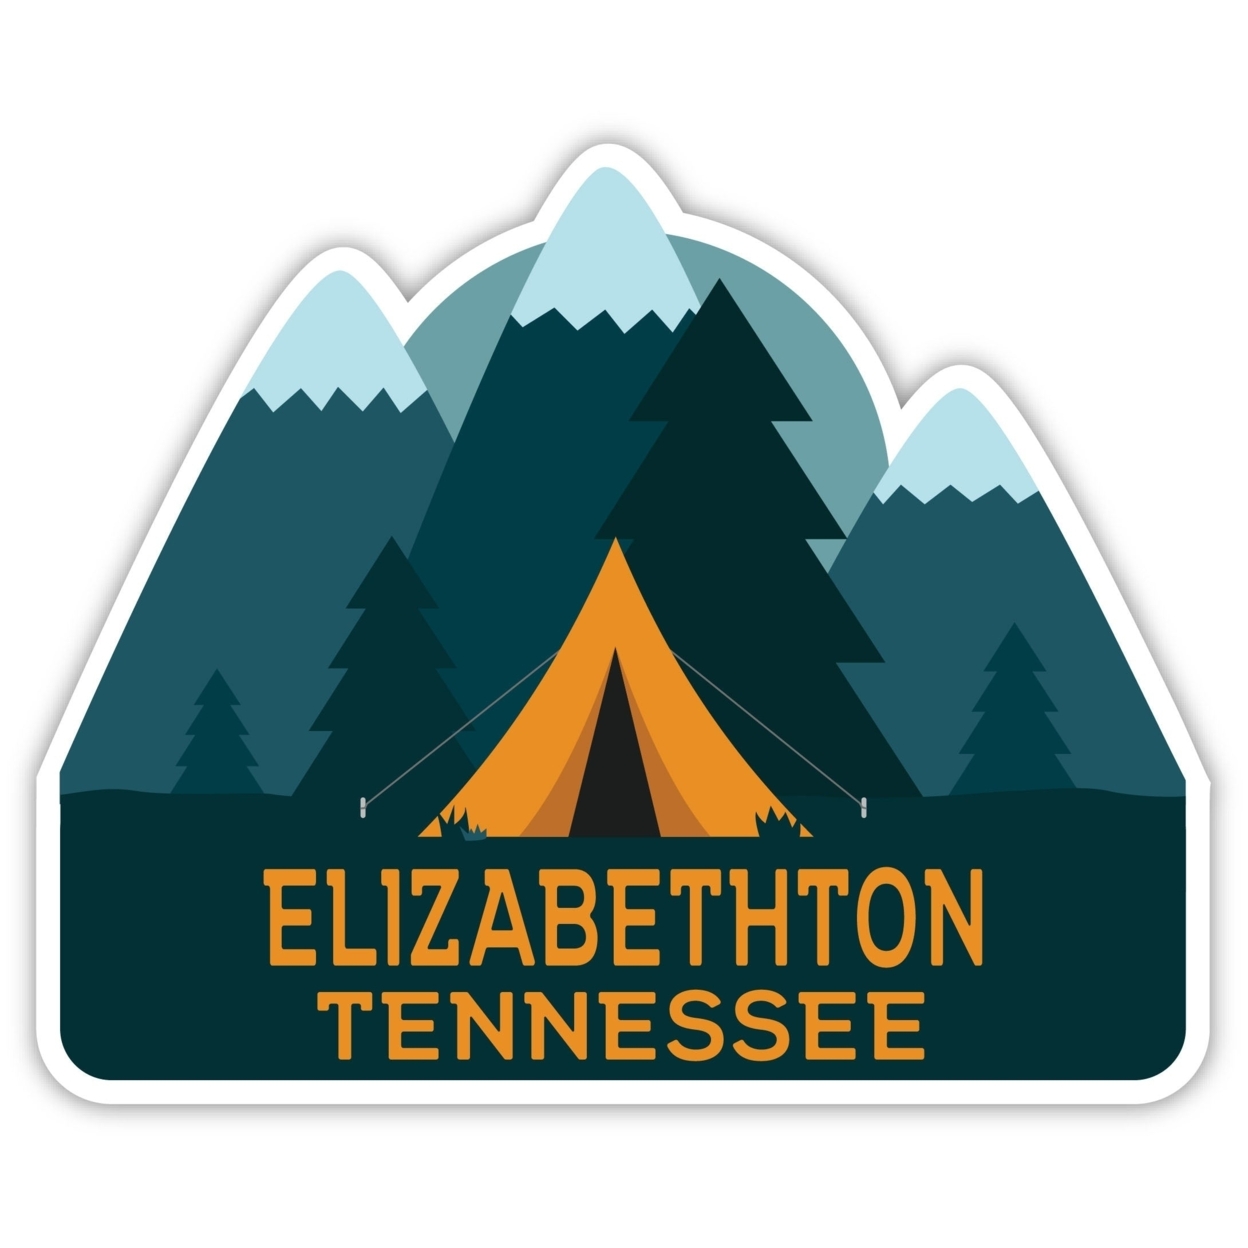 Elizabethton Tennessee Souvenir Decorative Stickers (Choose Theme And Size) - 4-Pack, 8-Inch, Bear